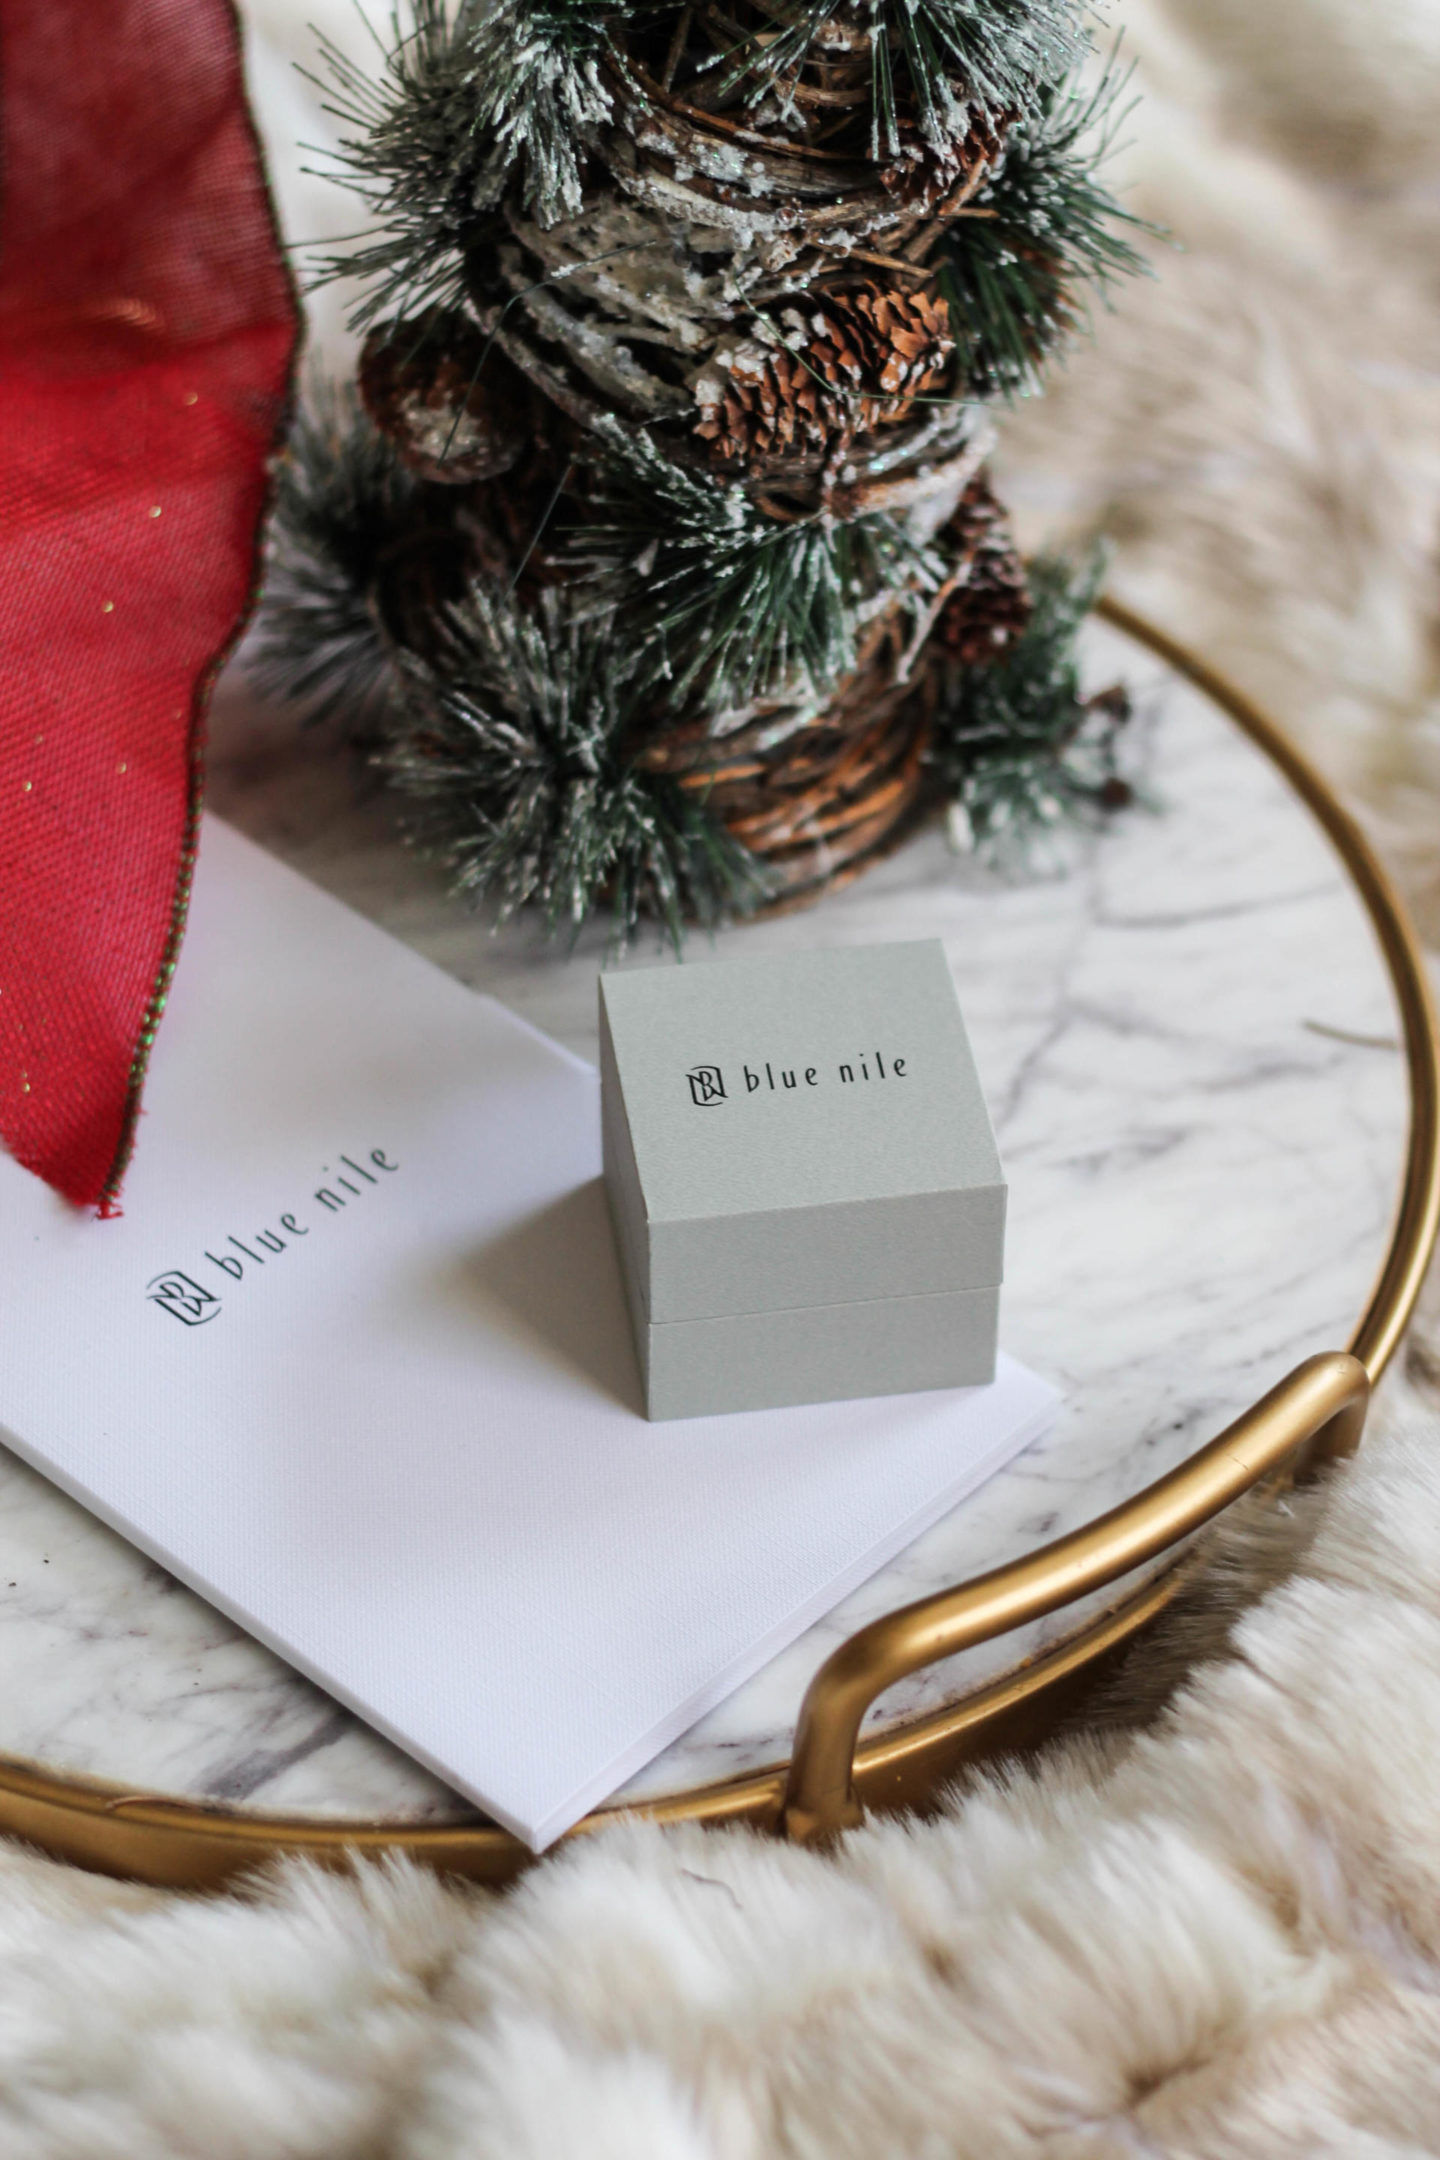 Give Blue Nile Jewelry This Christmas by New York fashion blogger Style Waltz